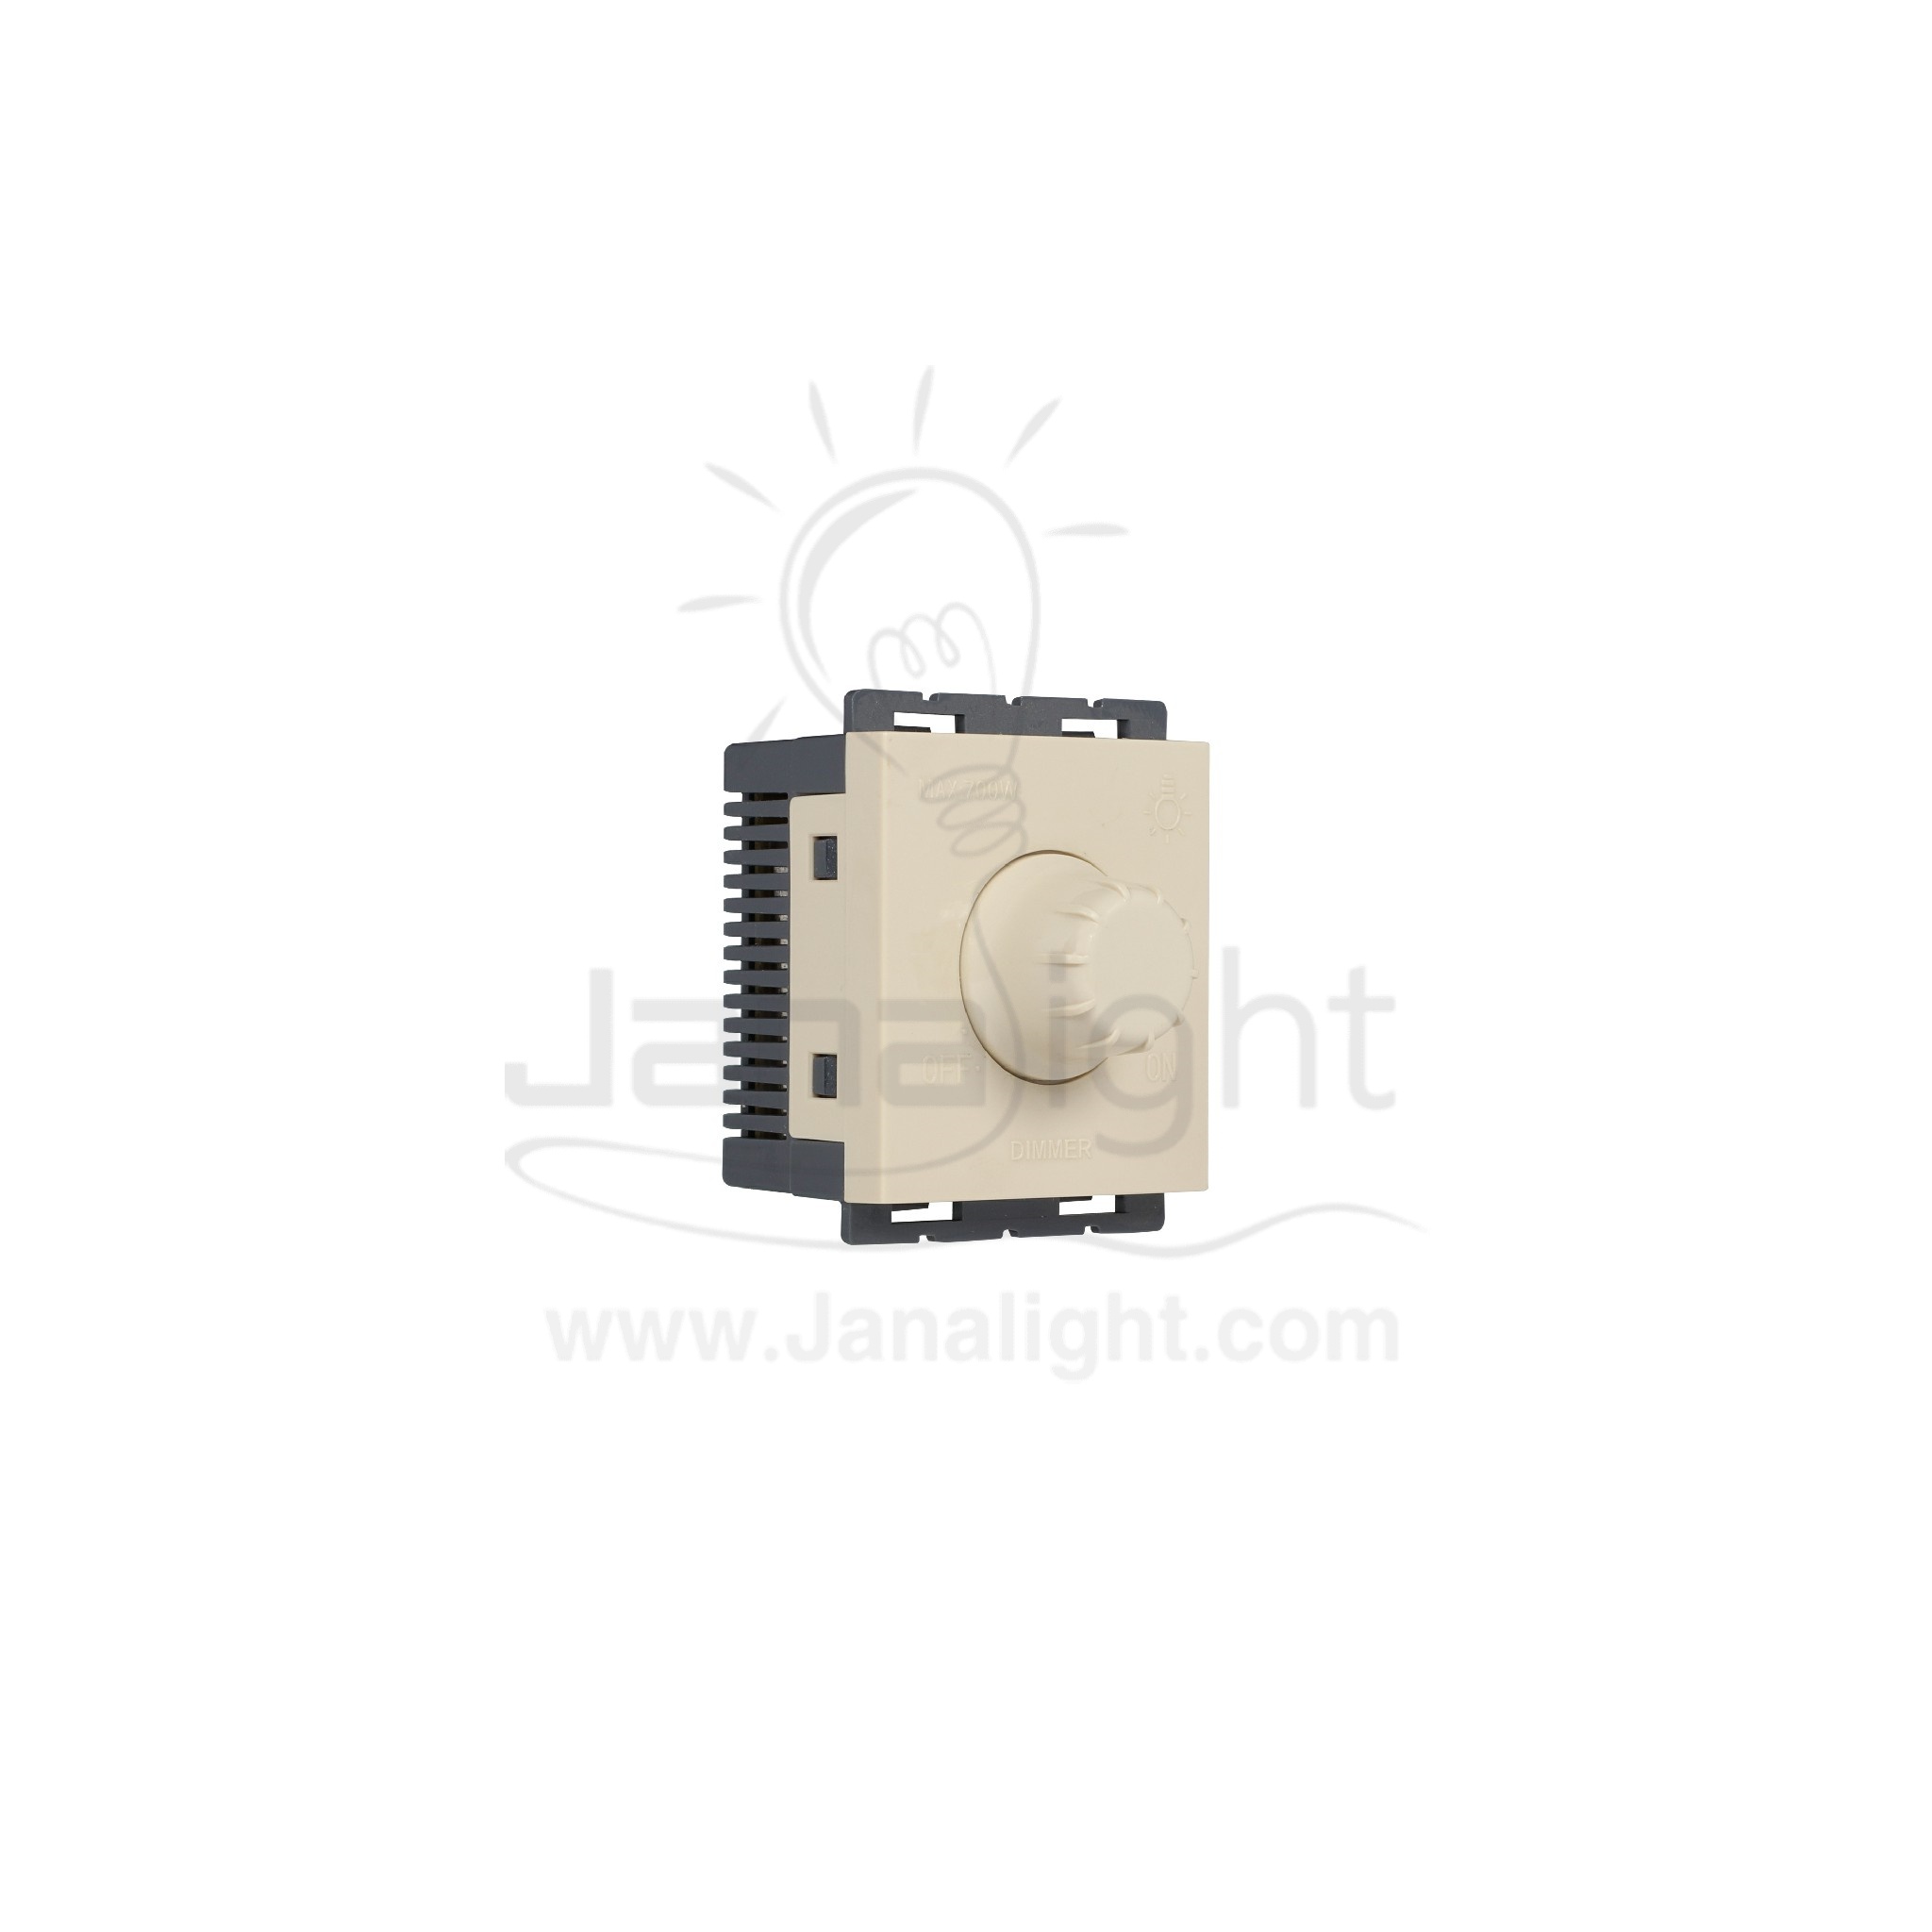 OSA دايمر انارة 700 وات بيج osa Socket Dimmers 700w For Lighting beige